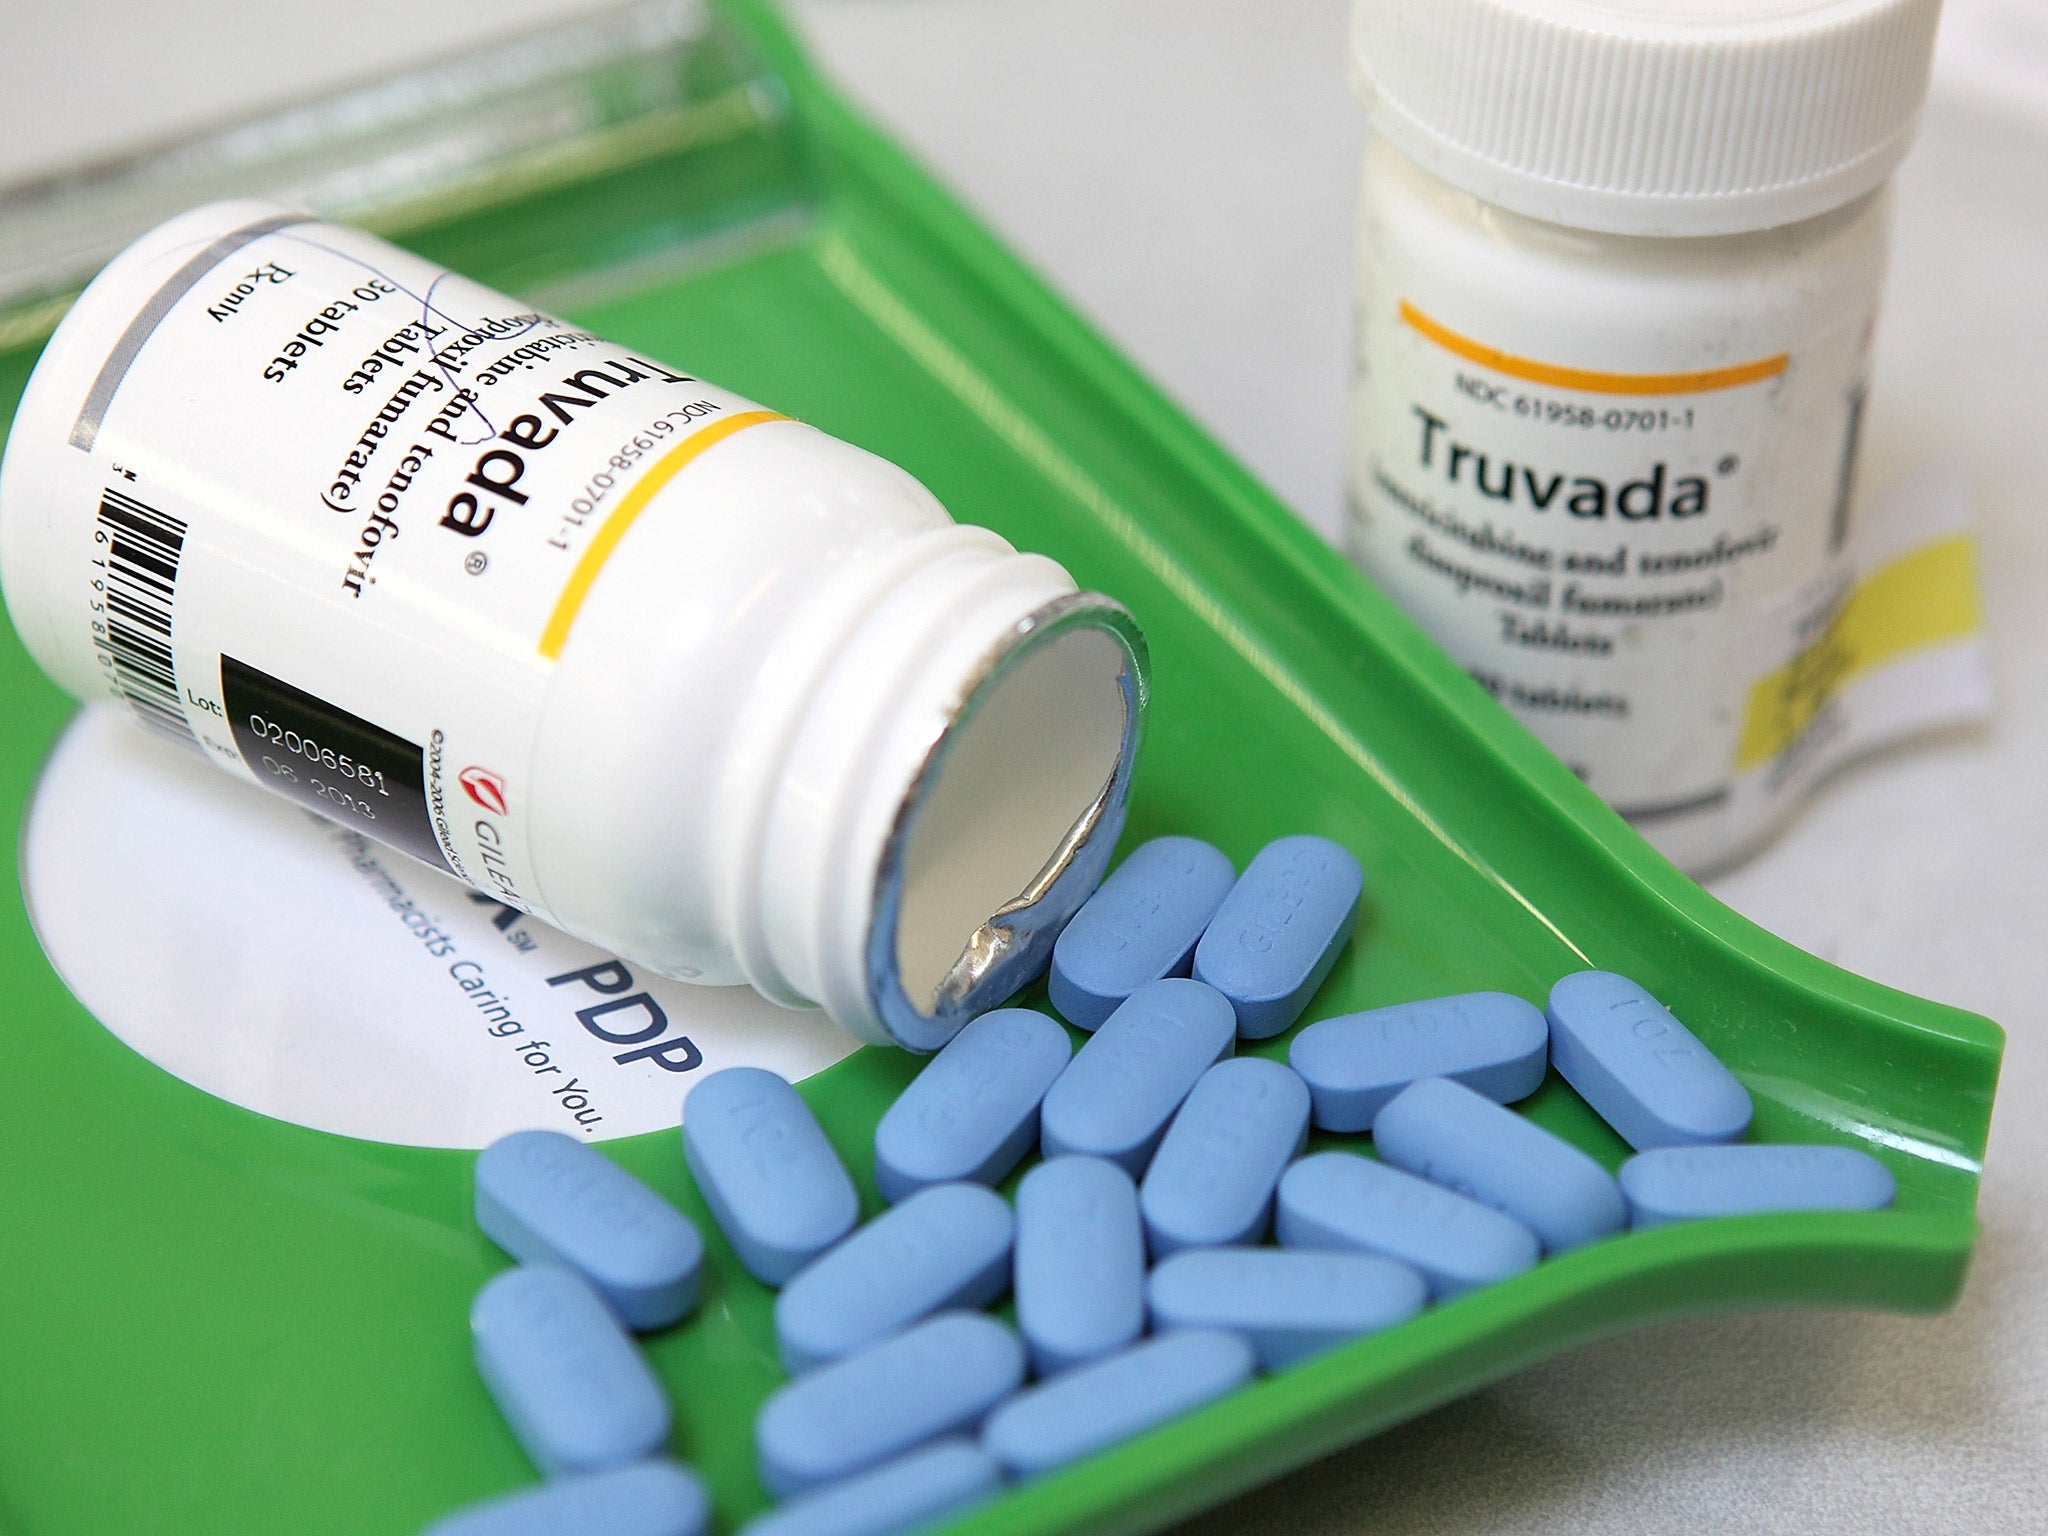 Truvada is already available in the USA